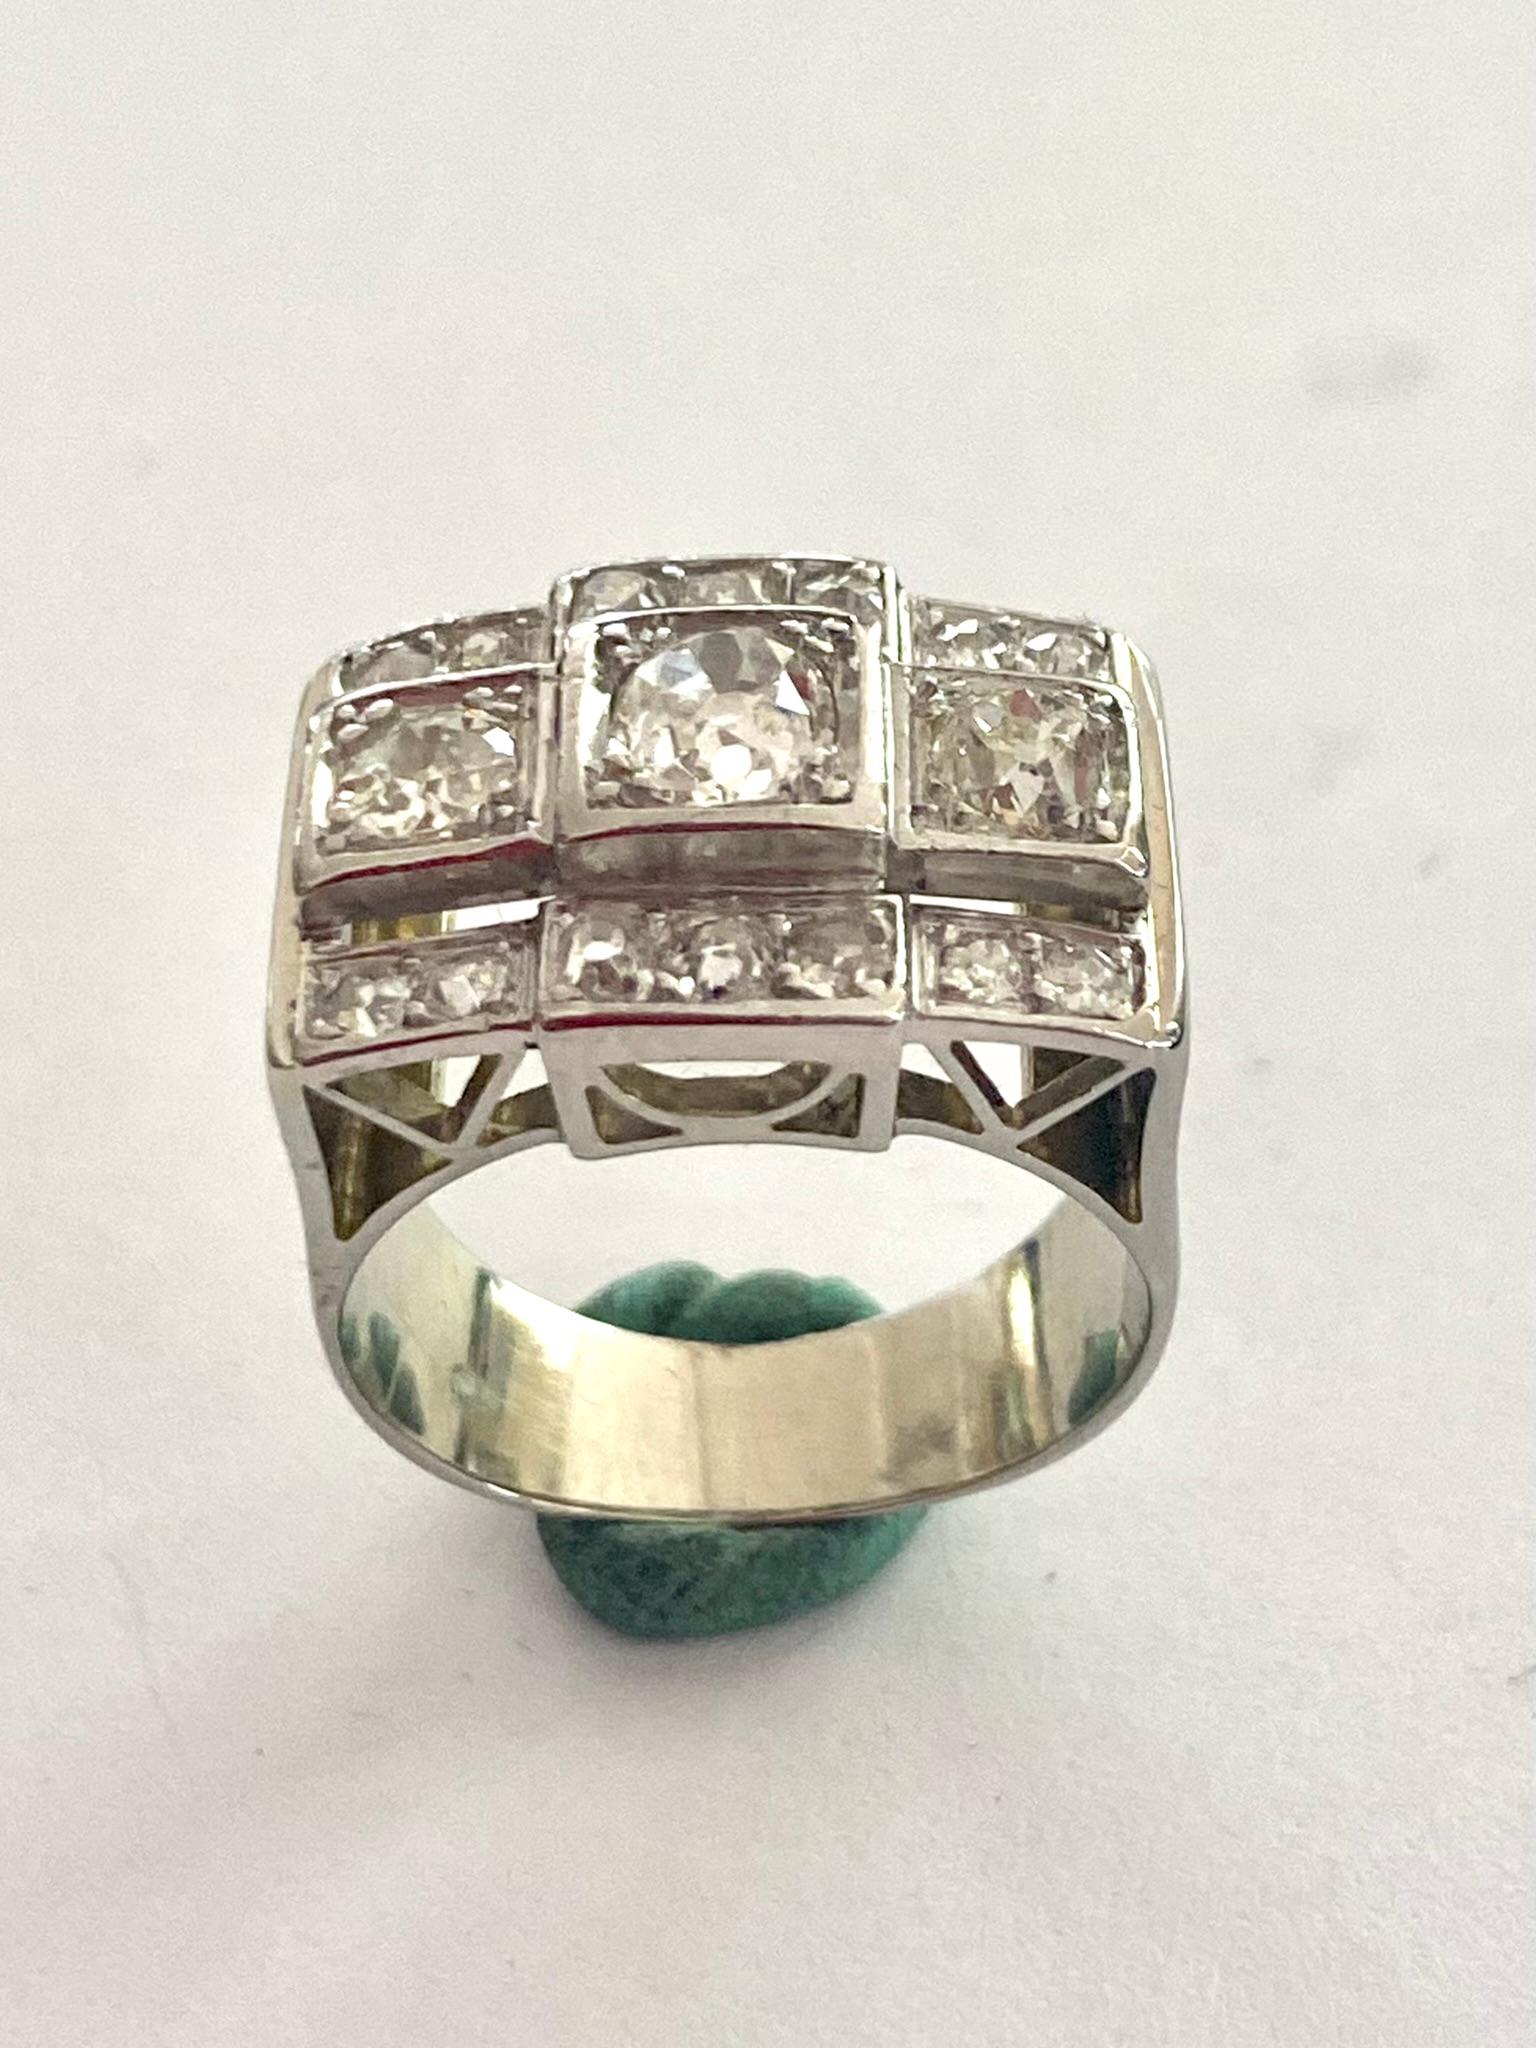 A 14K. (585/-) white gold ring, rectangular model with 17 old European cut diamonds.
Diamond weight: 1.80 ct quality: various Si/P3 color: F-L
Weight: 10.58 grams
size: 18x13x6 mm
Ring size: 17 (53.5) USA: 6.5 UK: N
Made in the Netherlands ca 1940 -